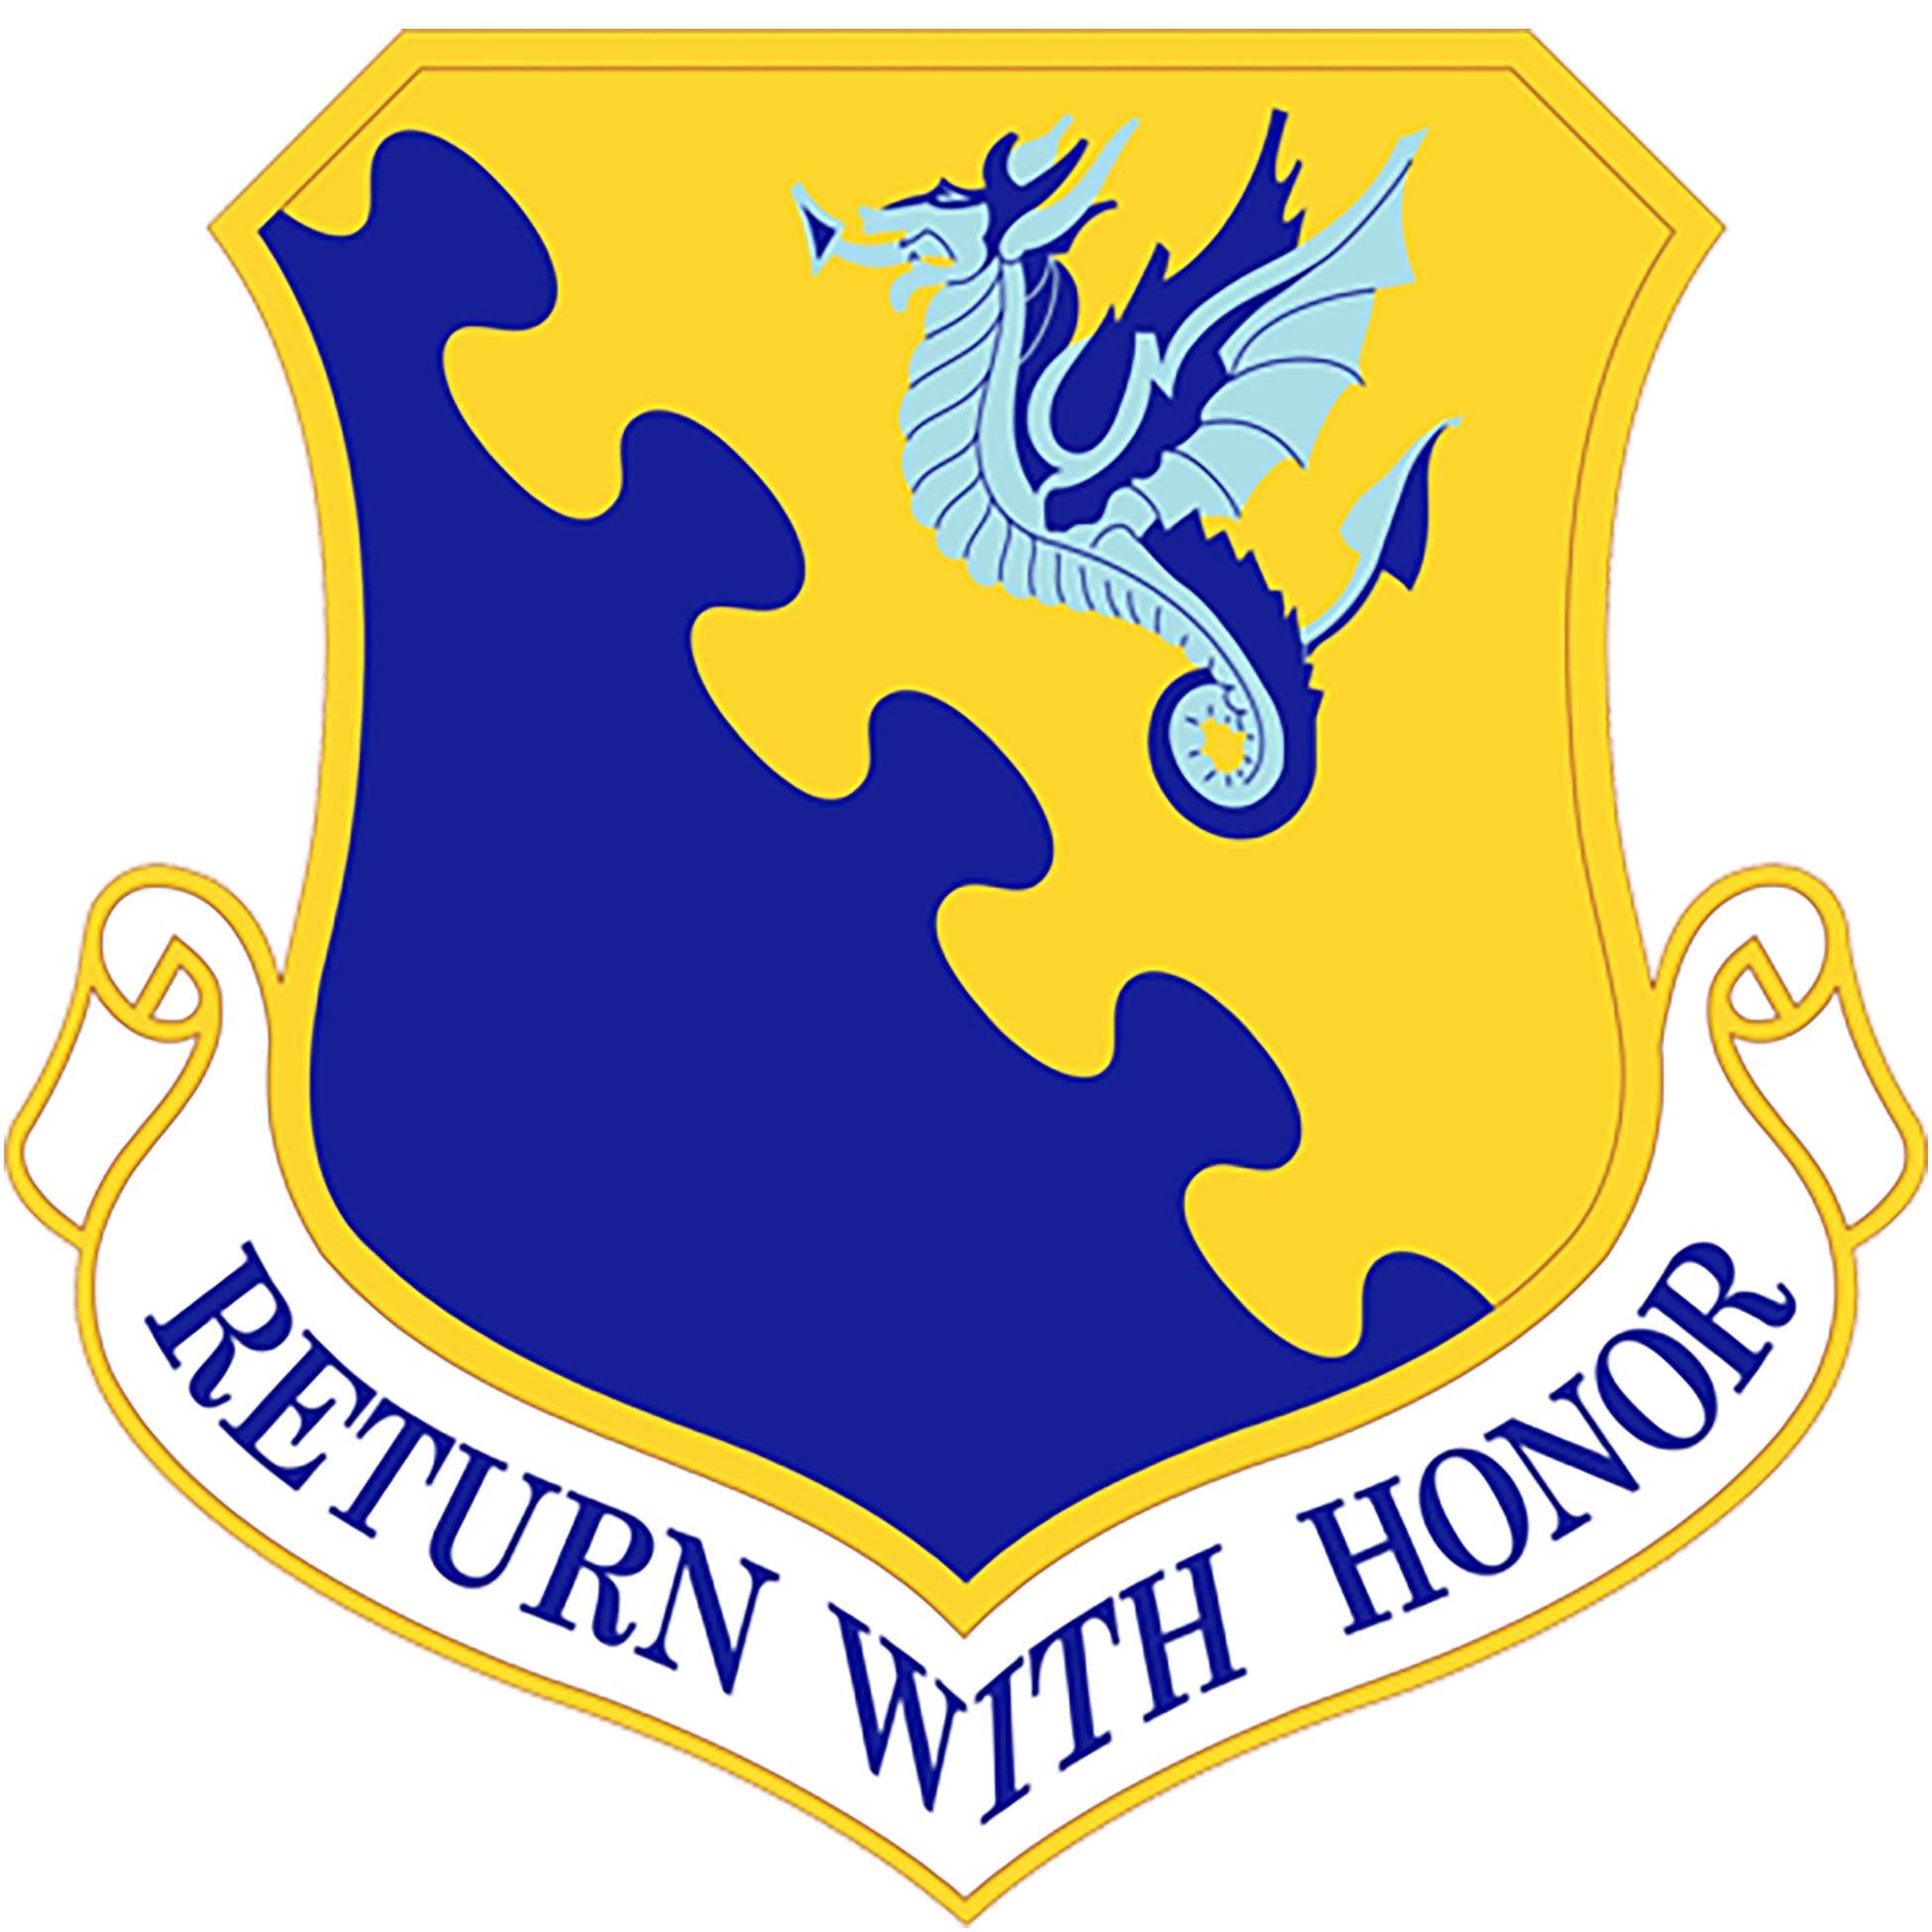 31st Fighter Wing